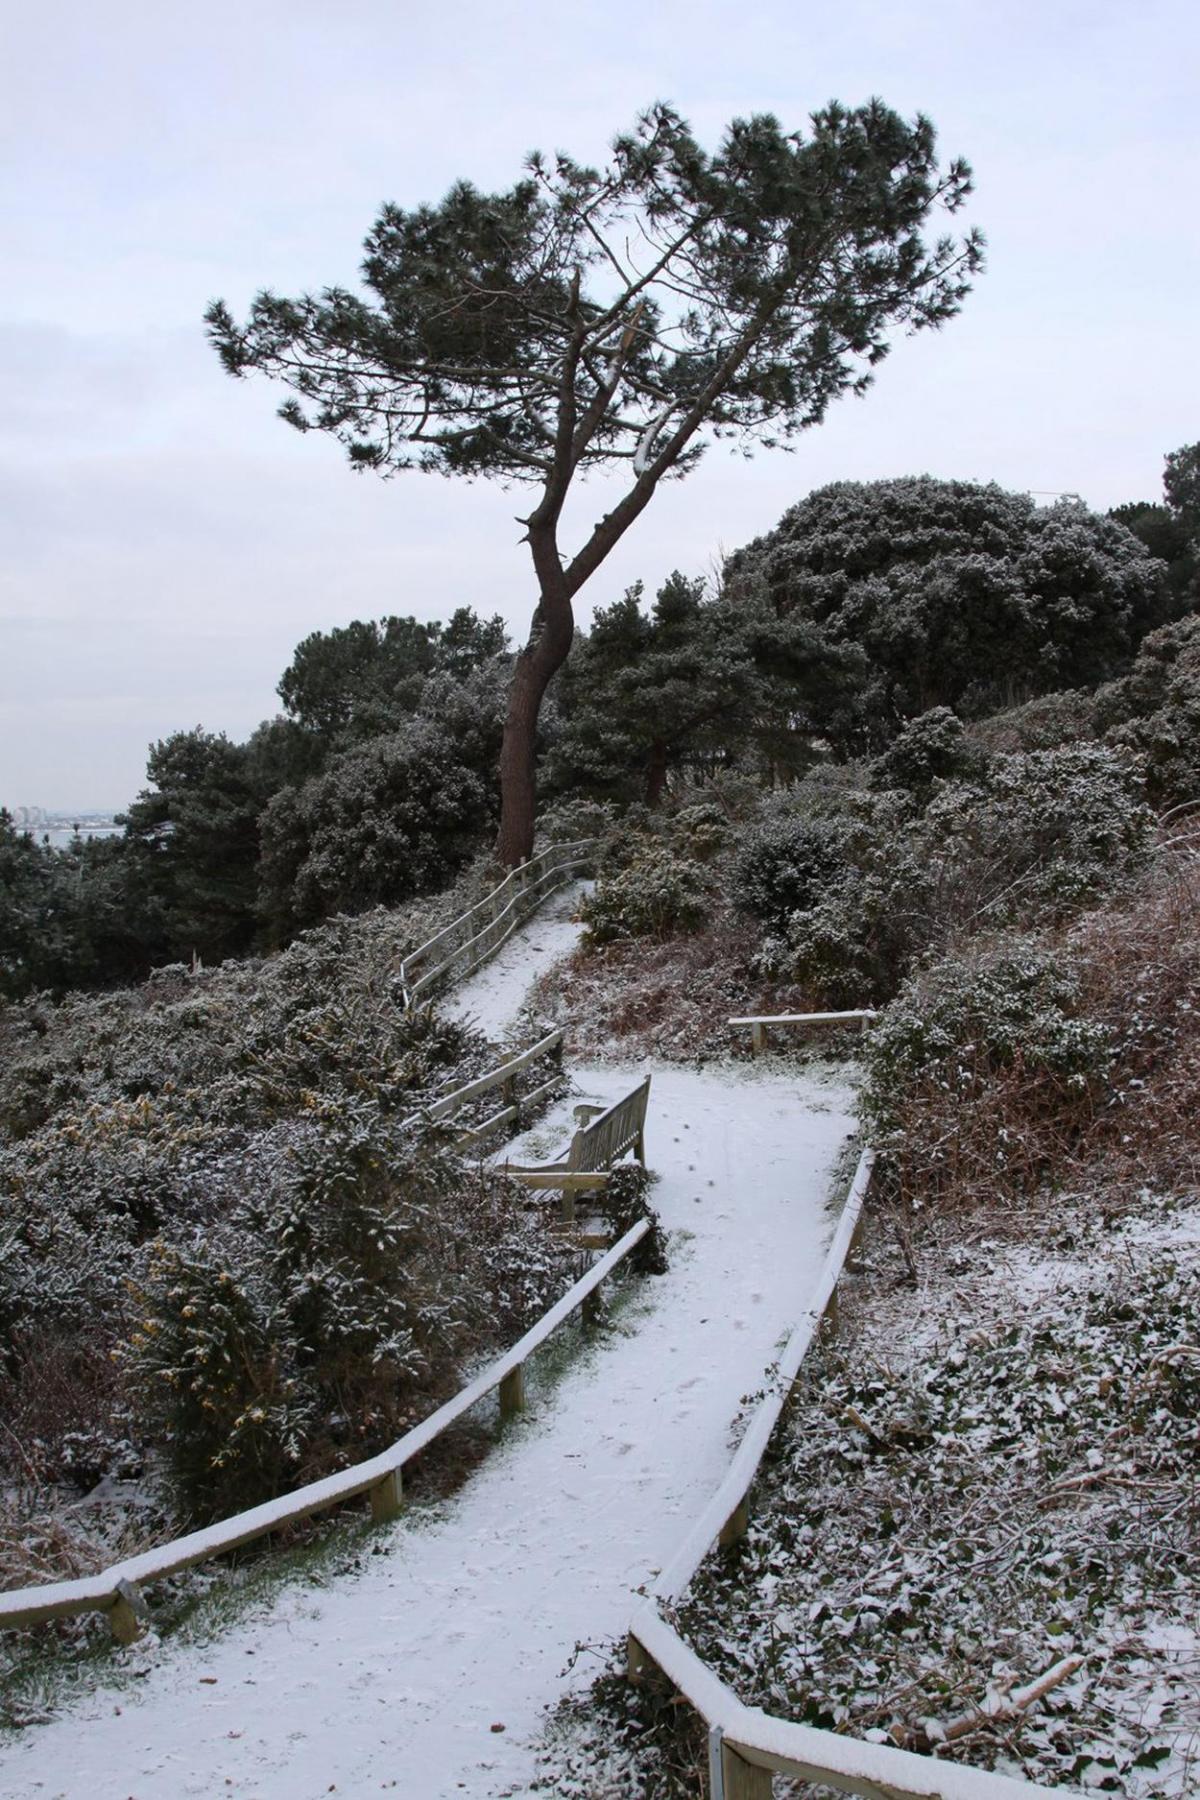 Pictures of snow taken on 3 February, 2015. Andrew Orman took these images this morning  after the snowfall at Evening Hill.